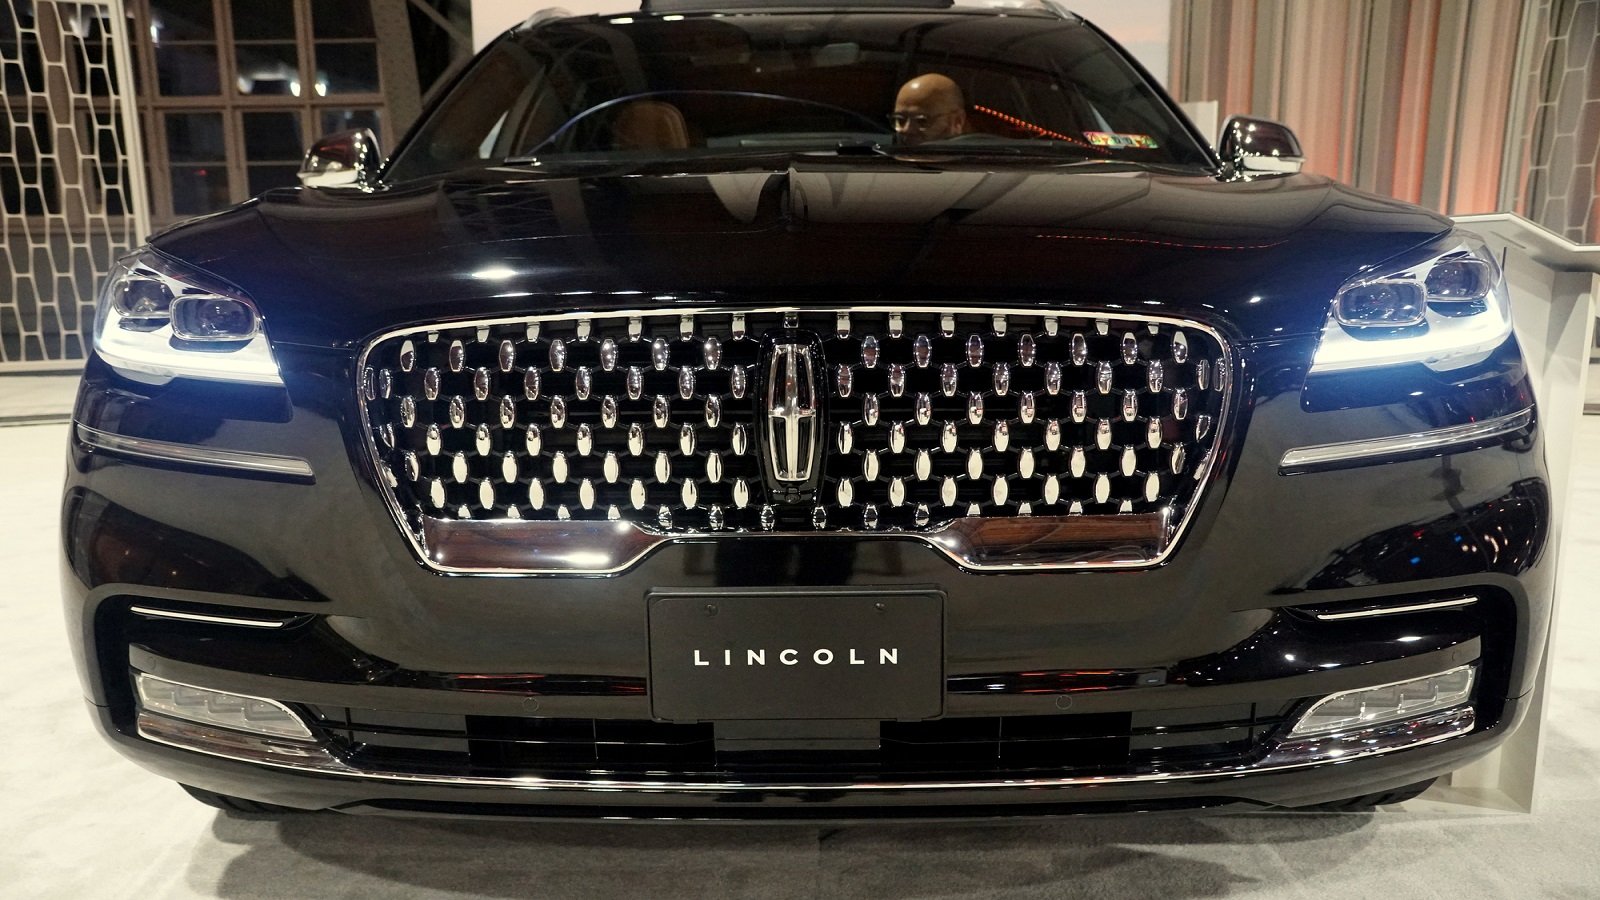 <p>The Lincoln Aviator is a popular luxury SUV that has caught the attention of many car enthusiasts in 2024. However, there are a few reasons why potential buyers might want to reconsider purchasing this vehicle.</p><ul> <li><strong>Fuel Efficiency</strong>: The Lincoln Aviator struggles with fuel efficiency, which can make it a less environmentally-friendly option.</li> <li><strong>Cost:</strong> The Aviator’s high price tag may deter potential buyers seeking a more budget-friendly luxury SUV.</li> <li><strong>Maintenance</strong>: Some owners have reported high-cost maintenance issues with the Lincoln Aviator, requiring more out-of-pocket expenses over time.</li> <li><strong>Interior Quality:</strong> Despite its luxury label, the Aviator’s interior has been criticized for not living up to expectations in terms of quality and features.</li> </ul>